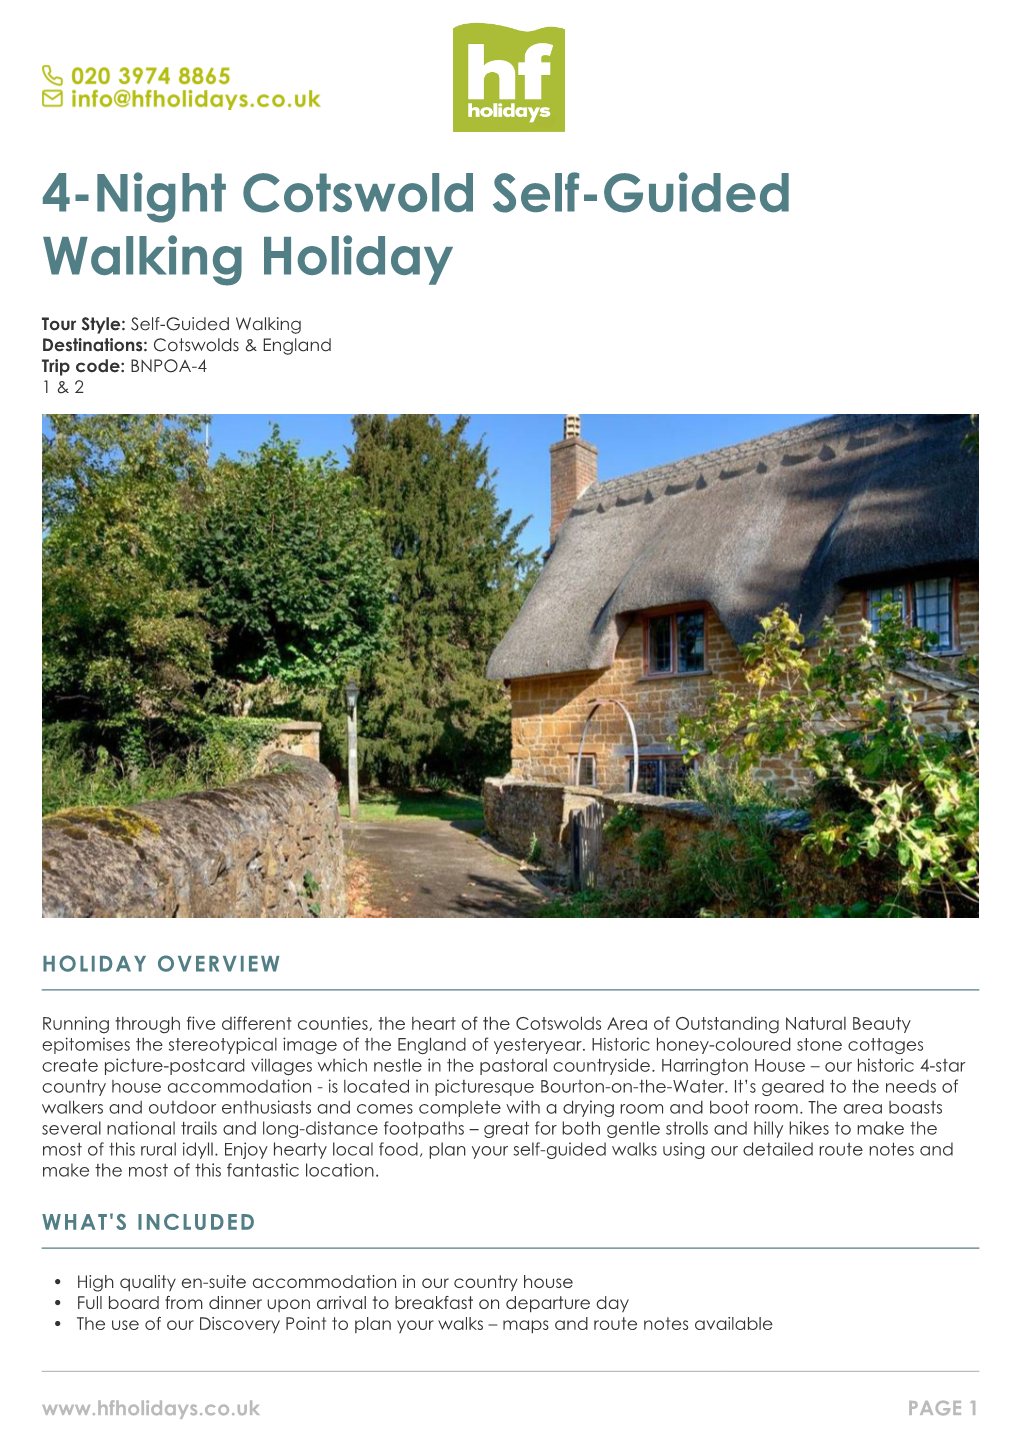 4-Night Cotswold Self-Guided Walking Holiday